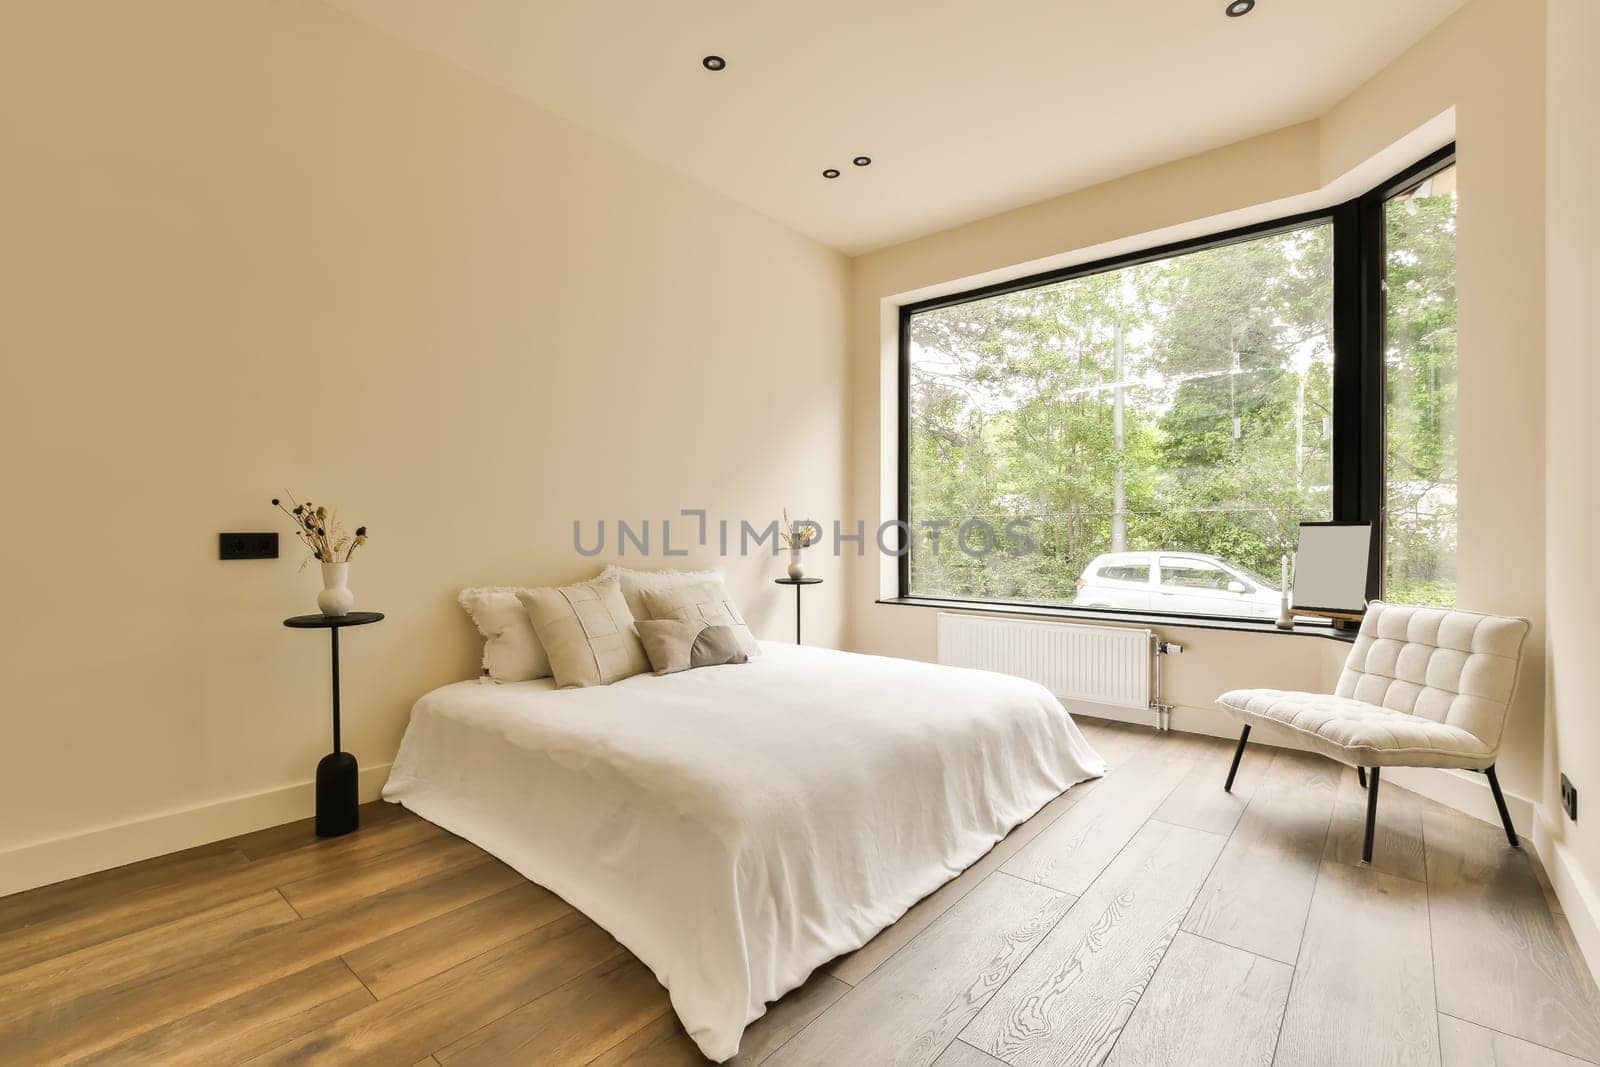 a bedroom with wood flooring and white walls, there is a large window that looks out onto the street